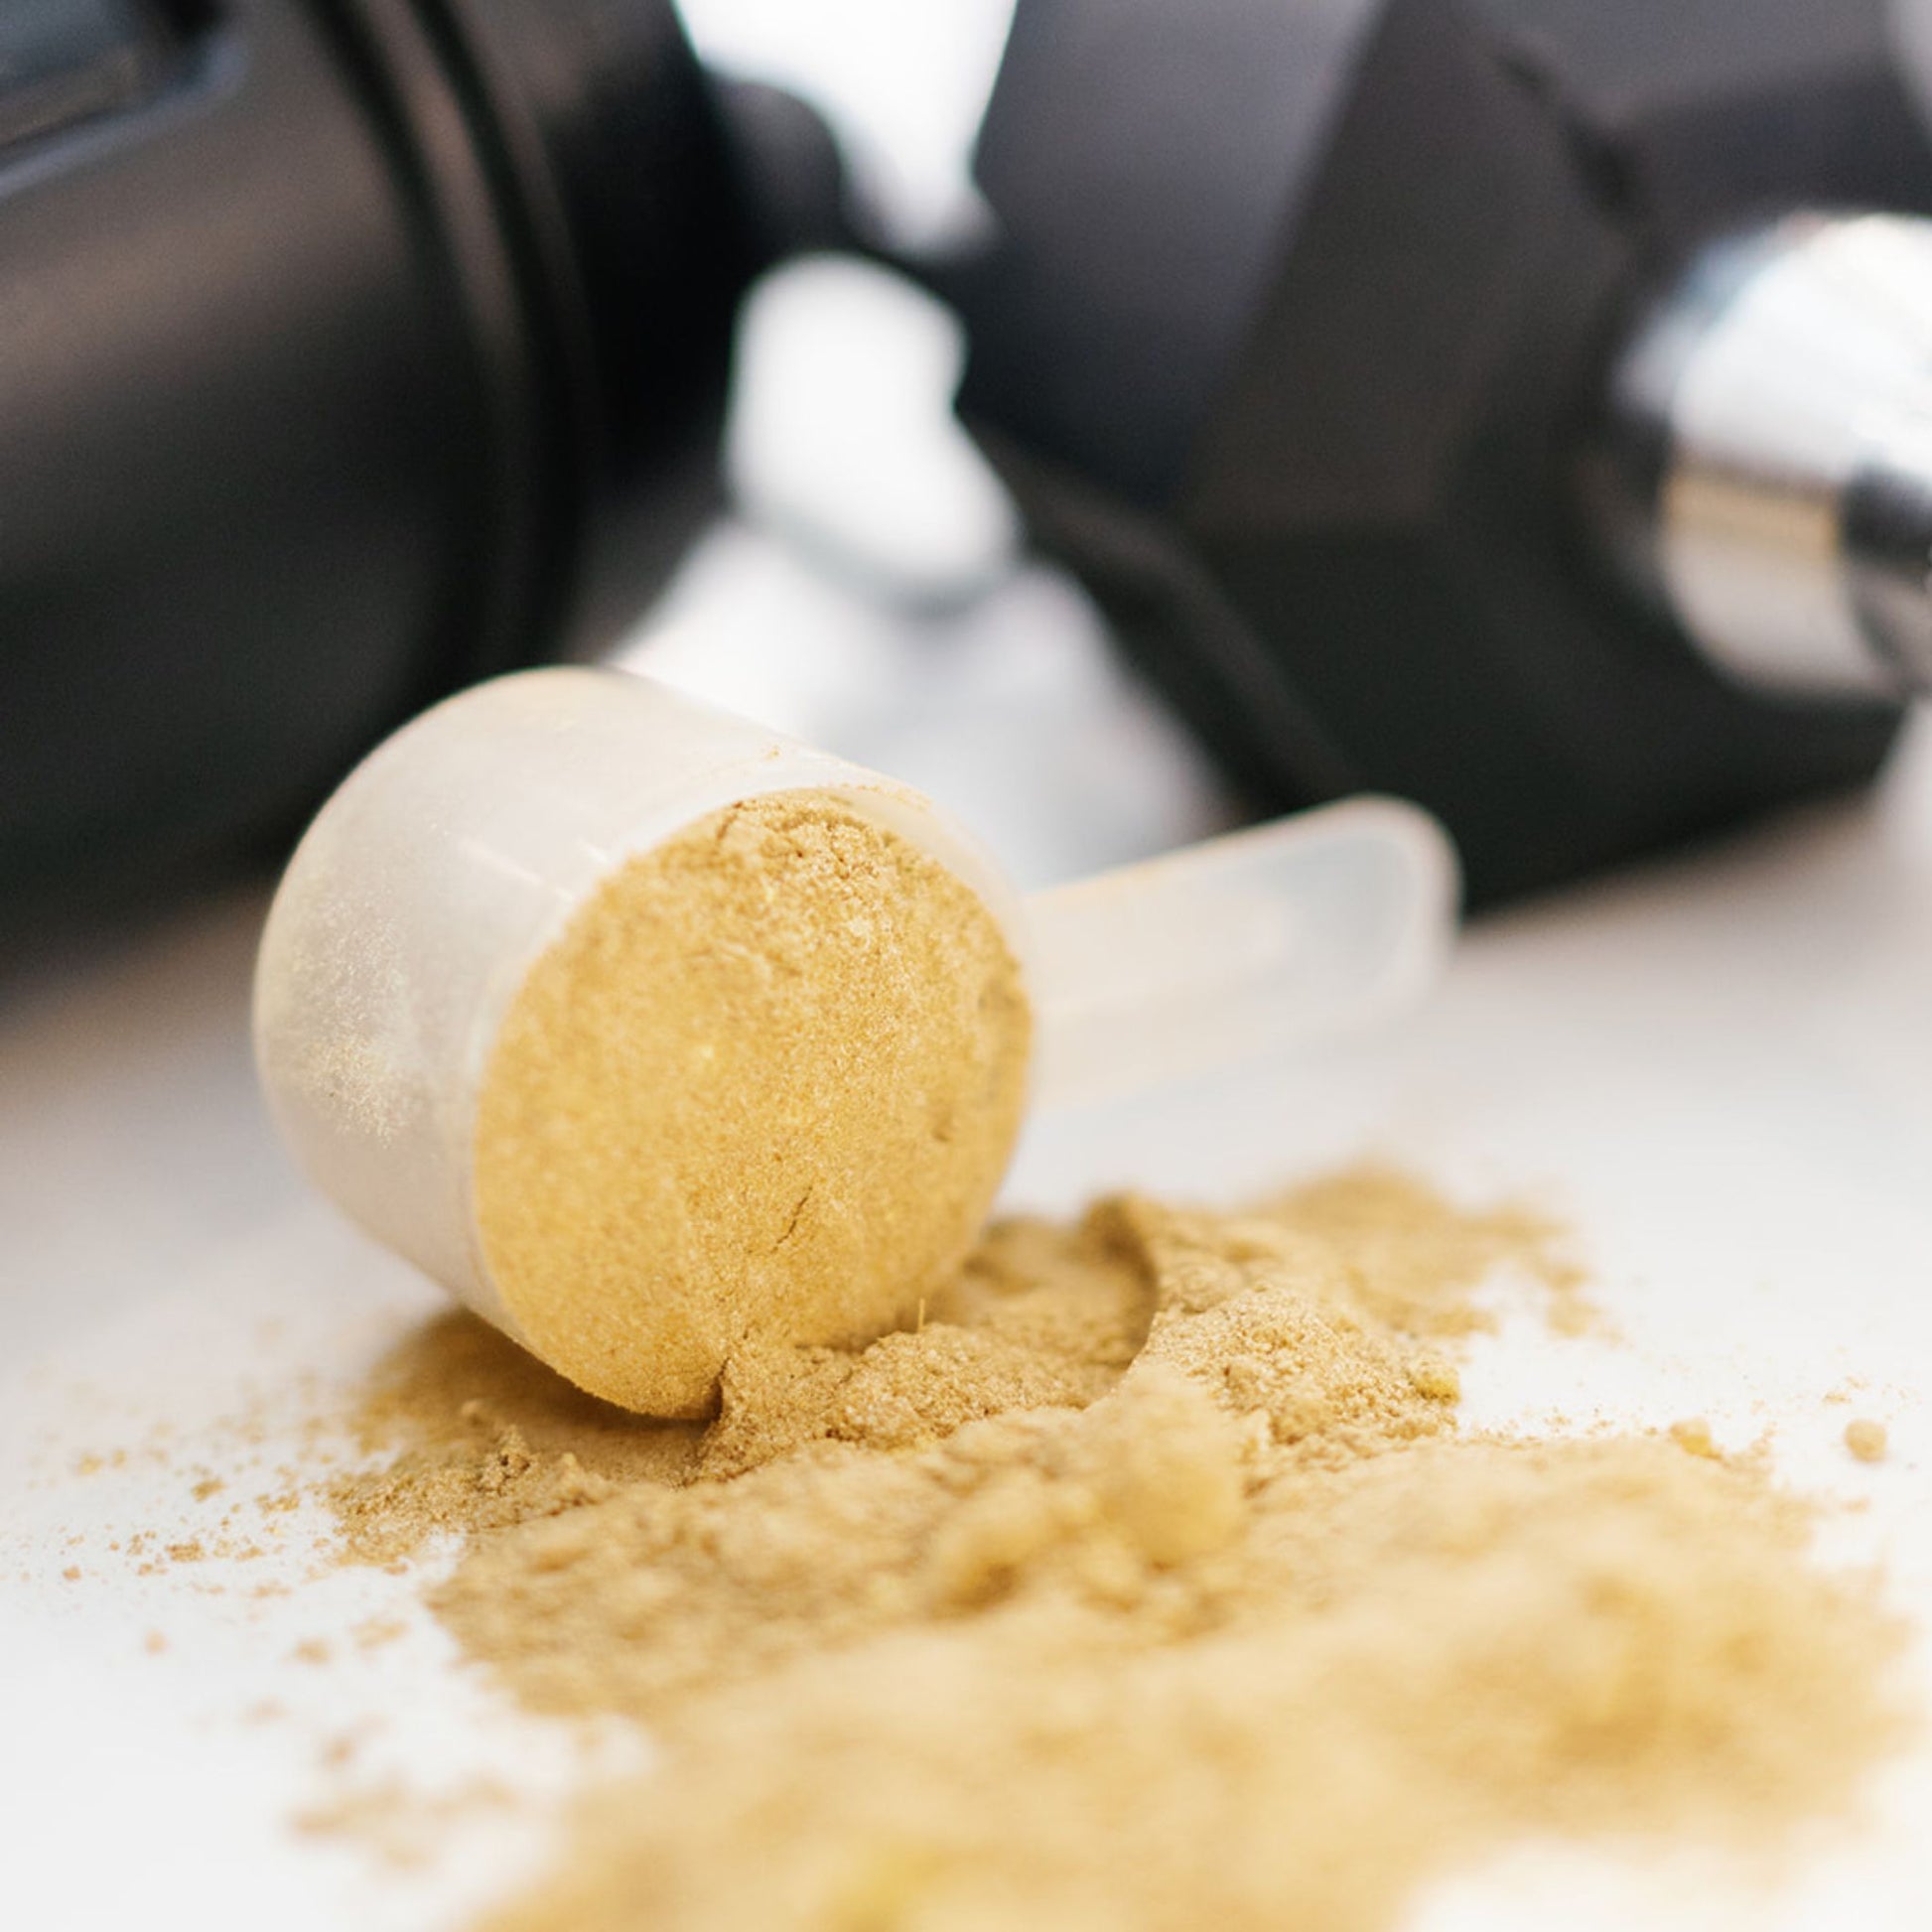 Golden salutem scoop with powder spilling out onto white counter. Black dumbell and shaker bottle behind the scoop with powder. 